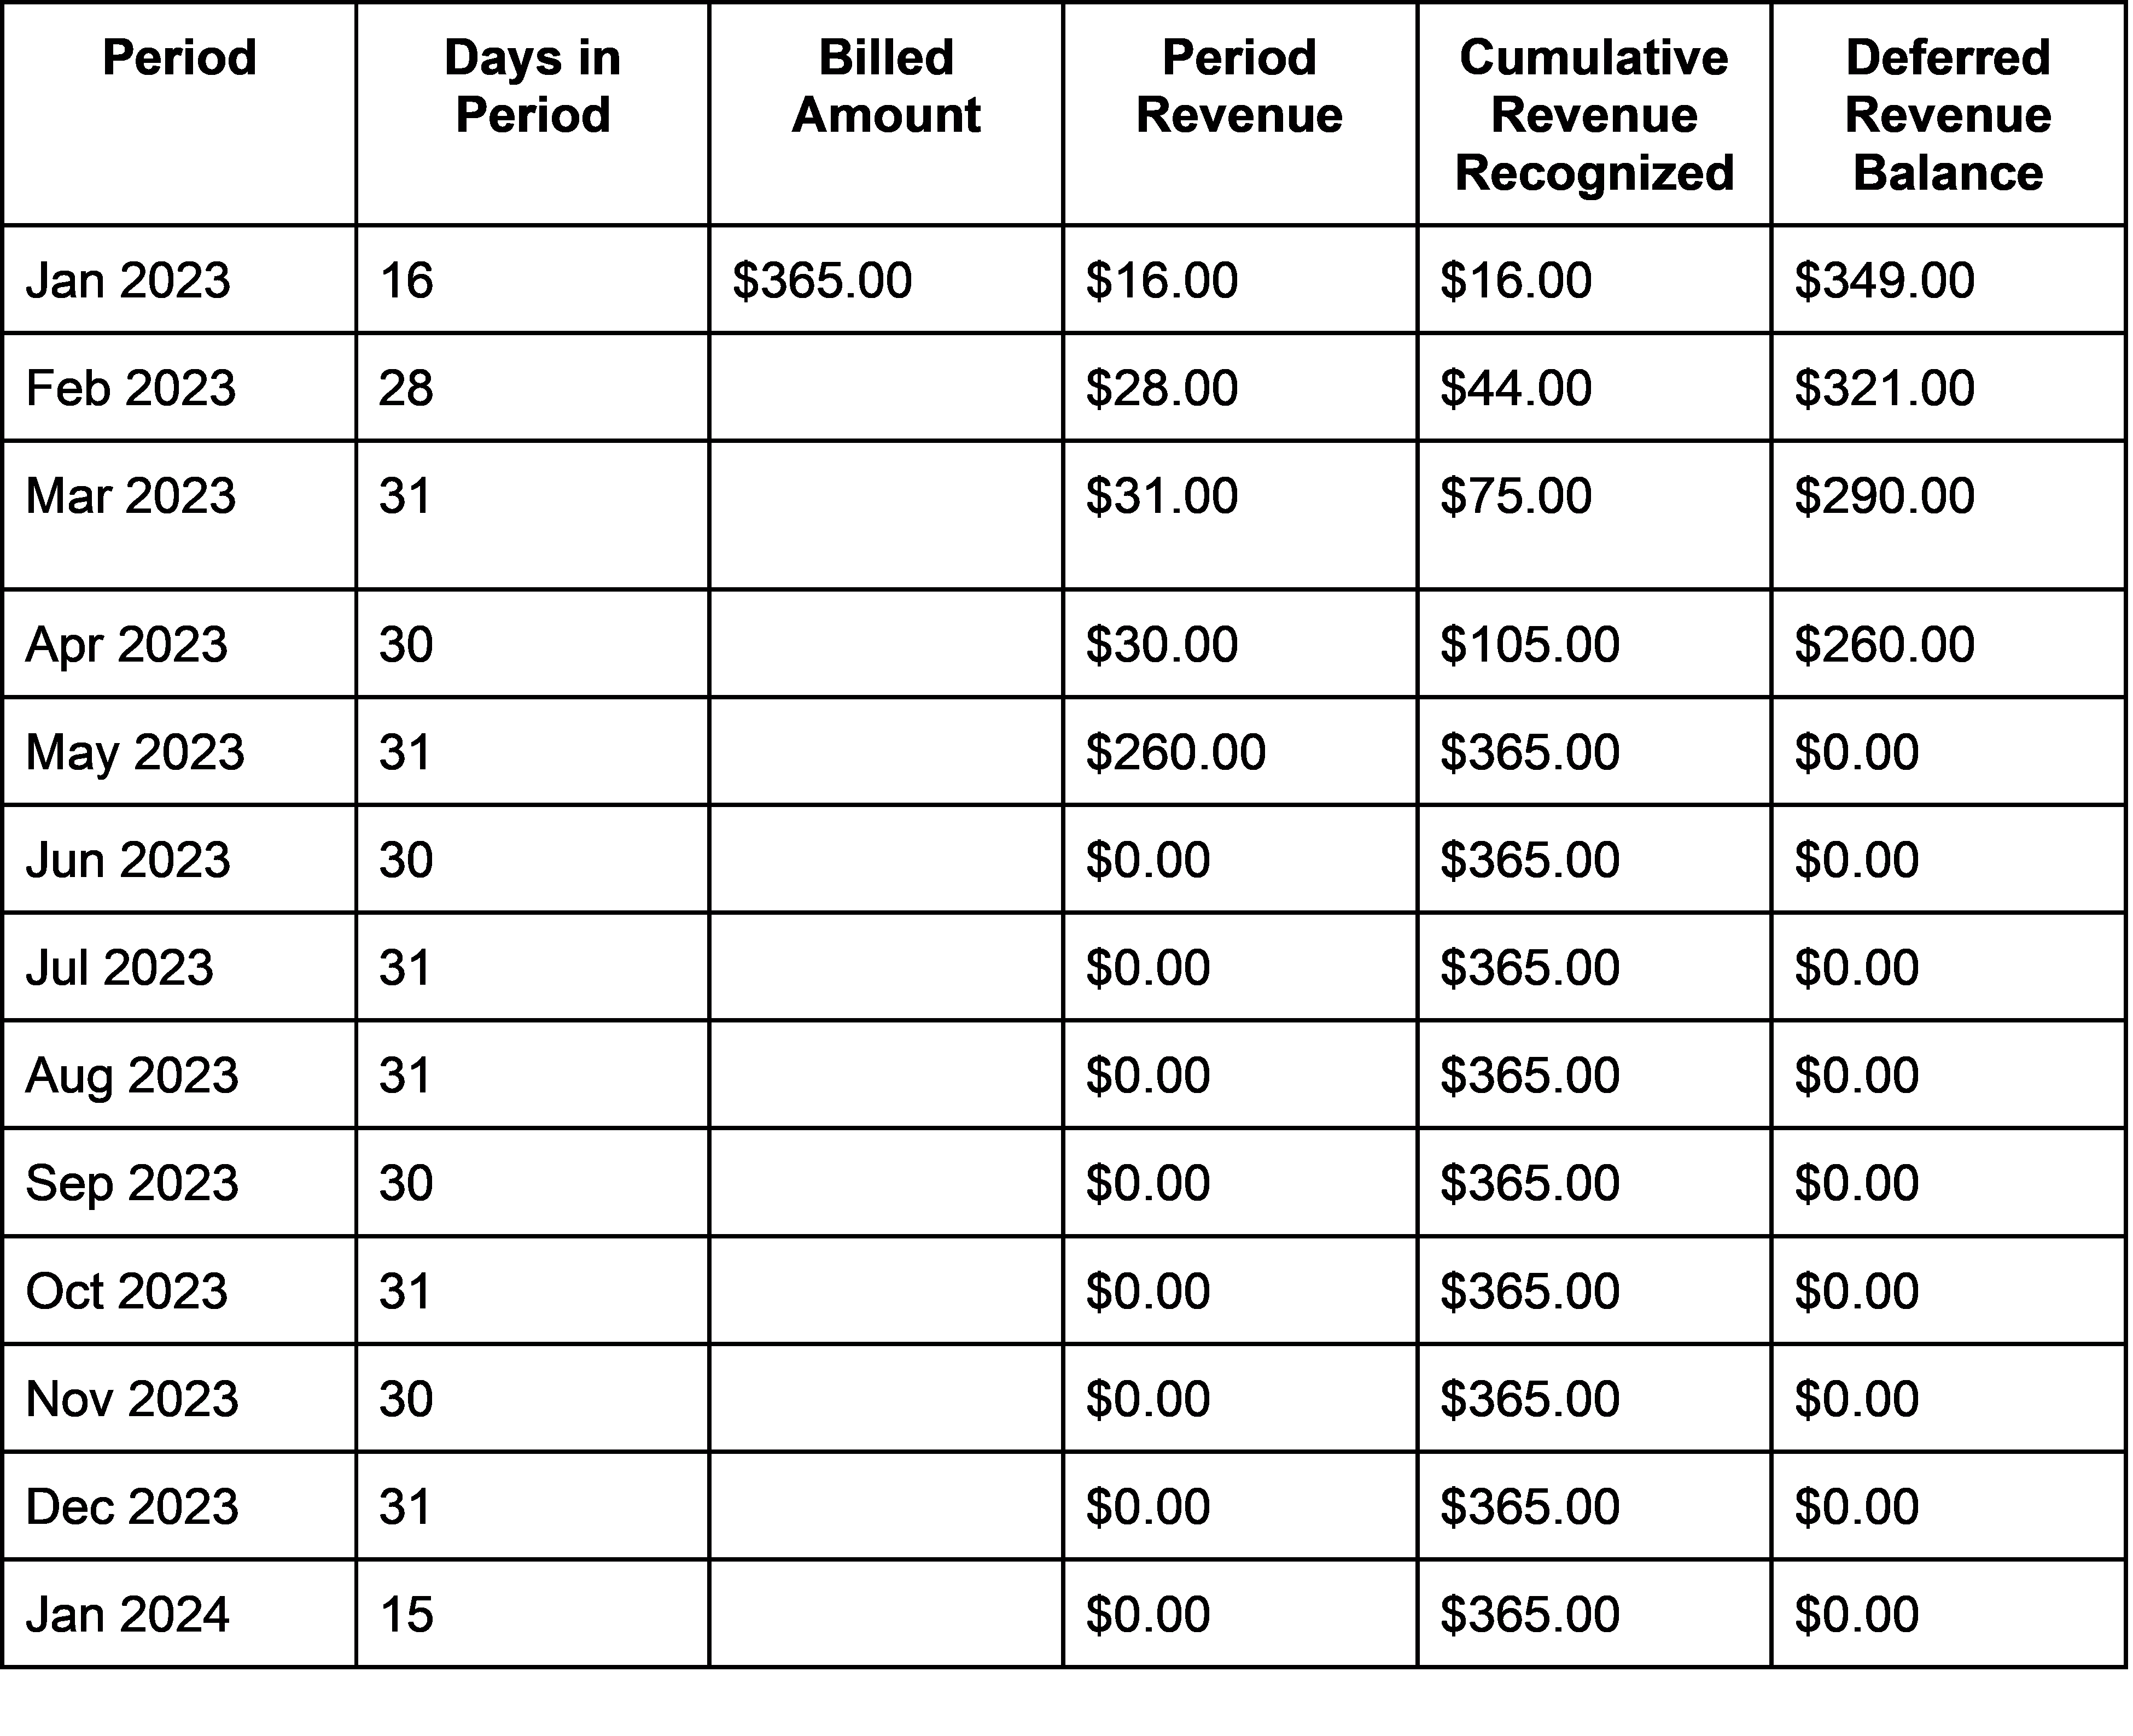 contraction or churn SaaS revenue recognition schedule without refund